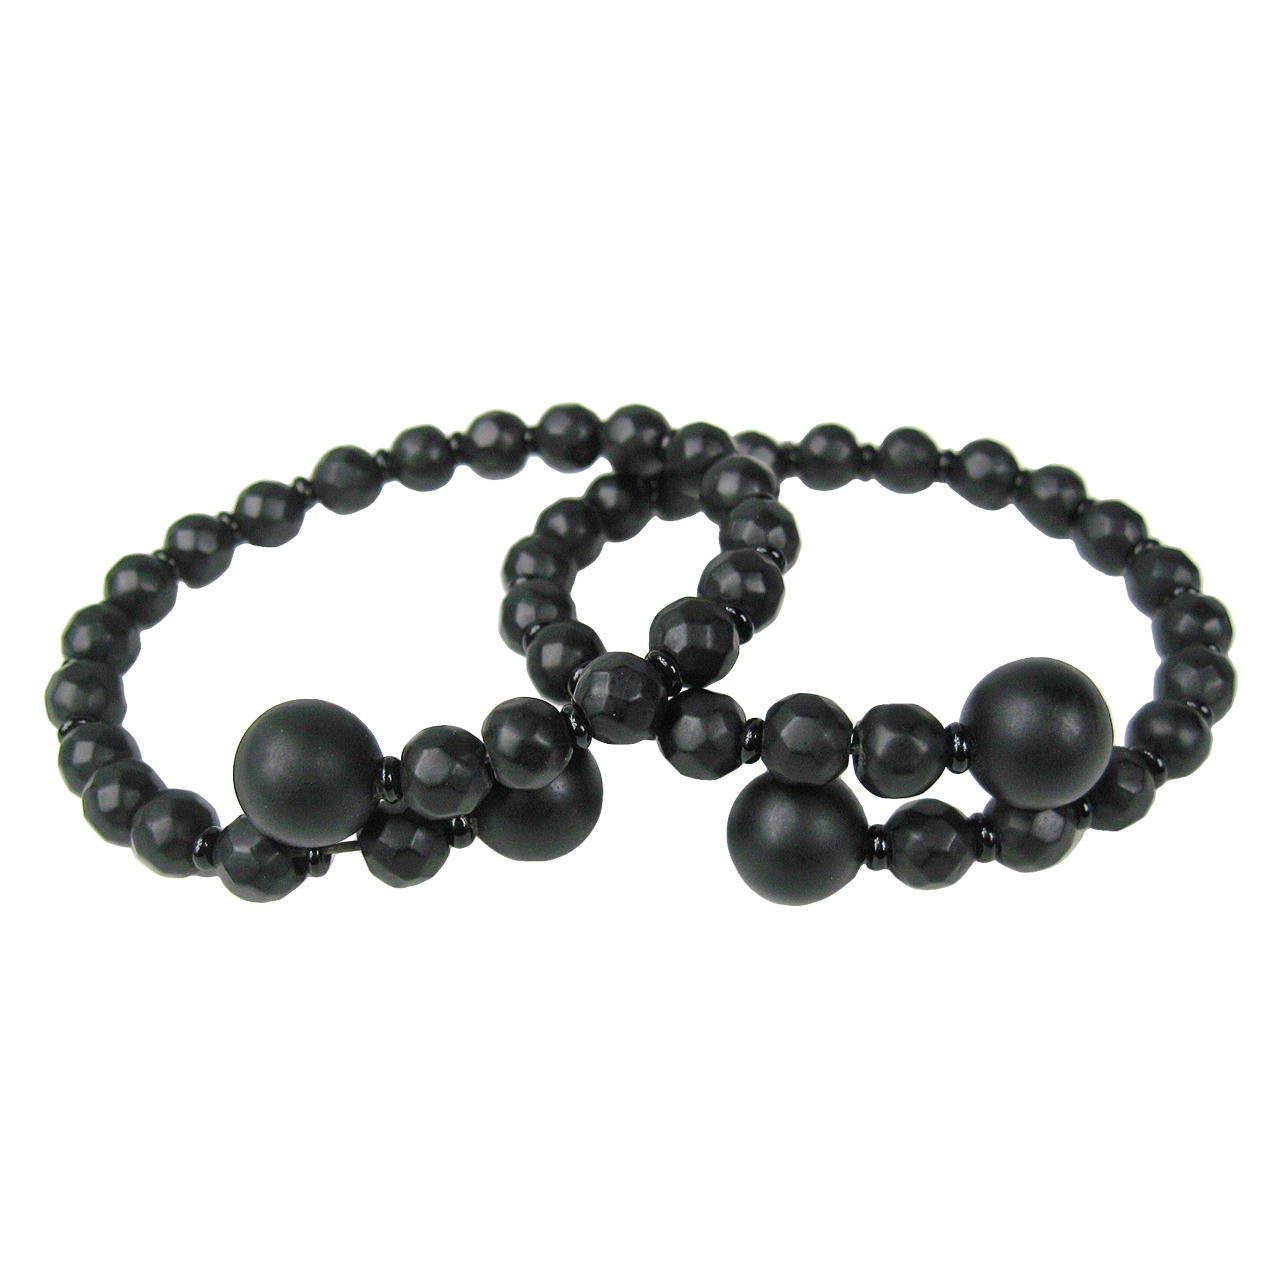 Paar frühe Whitby Jet Coiled Wrap passende Armbänder MCNY im Angebot